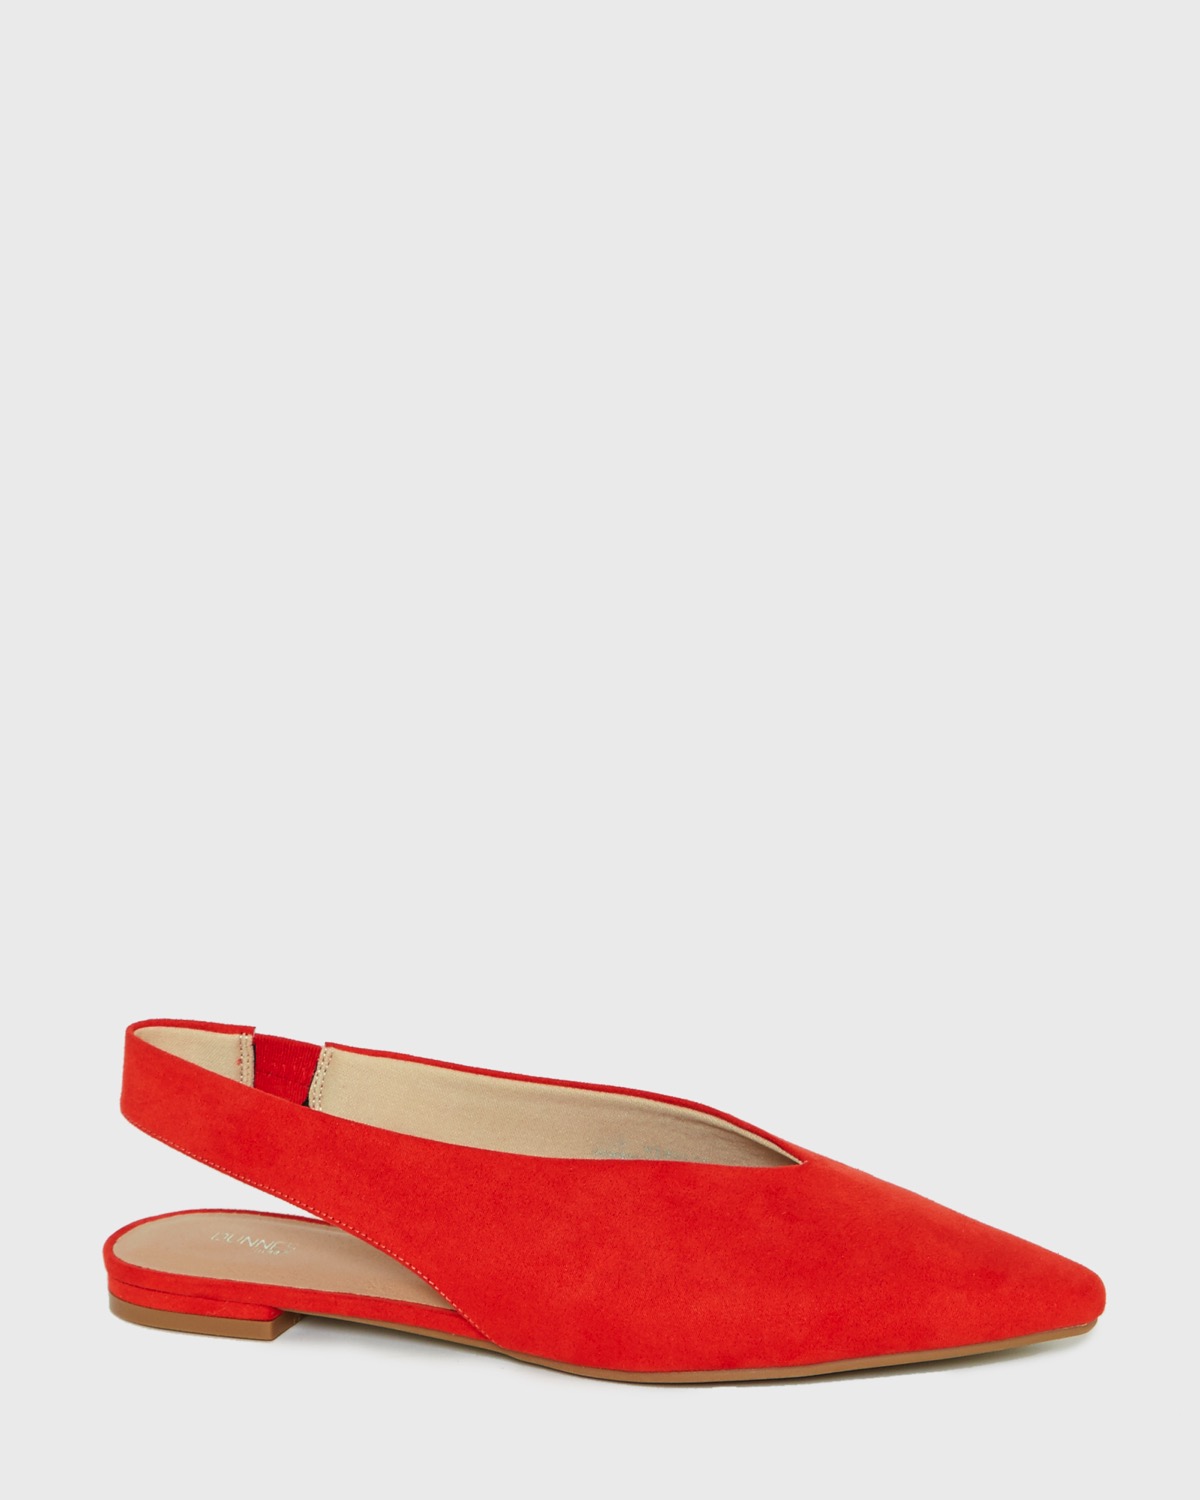 coral slingback shoes